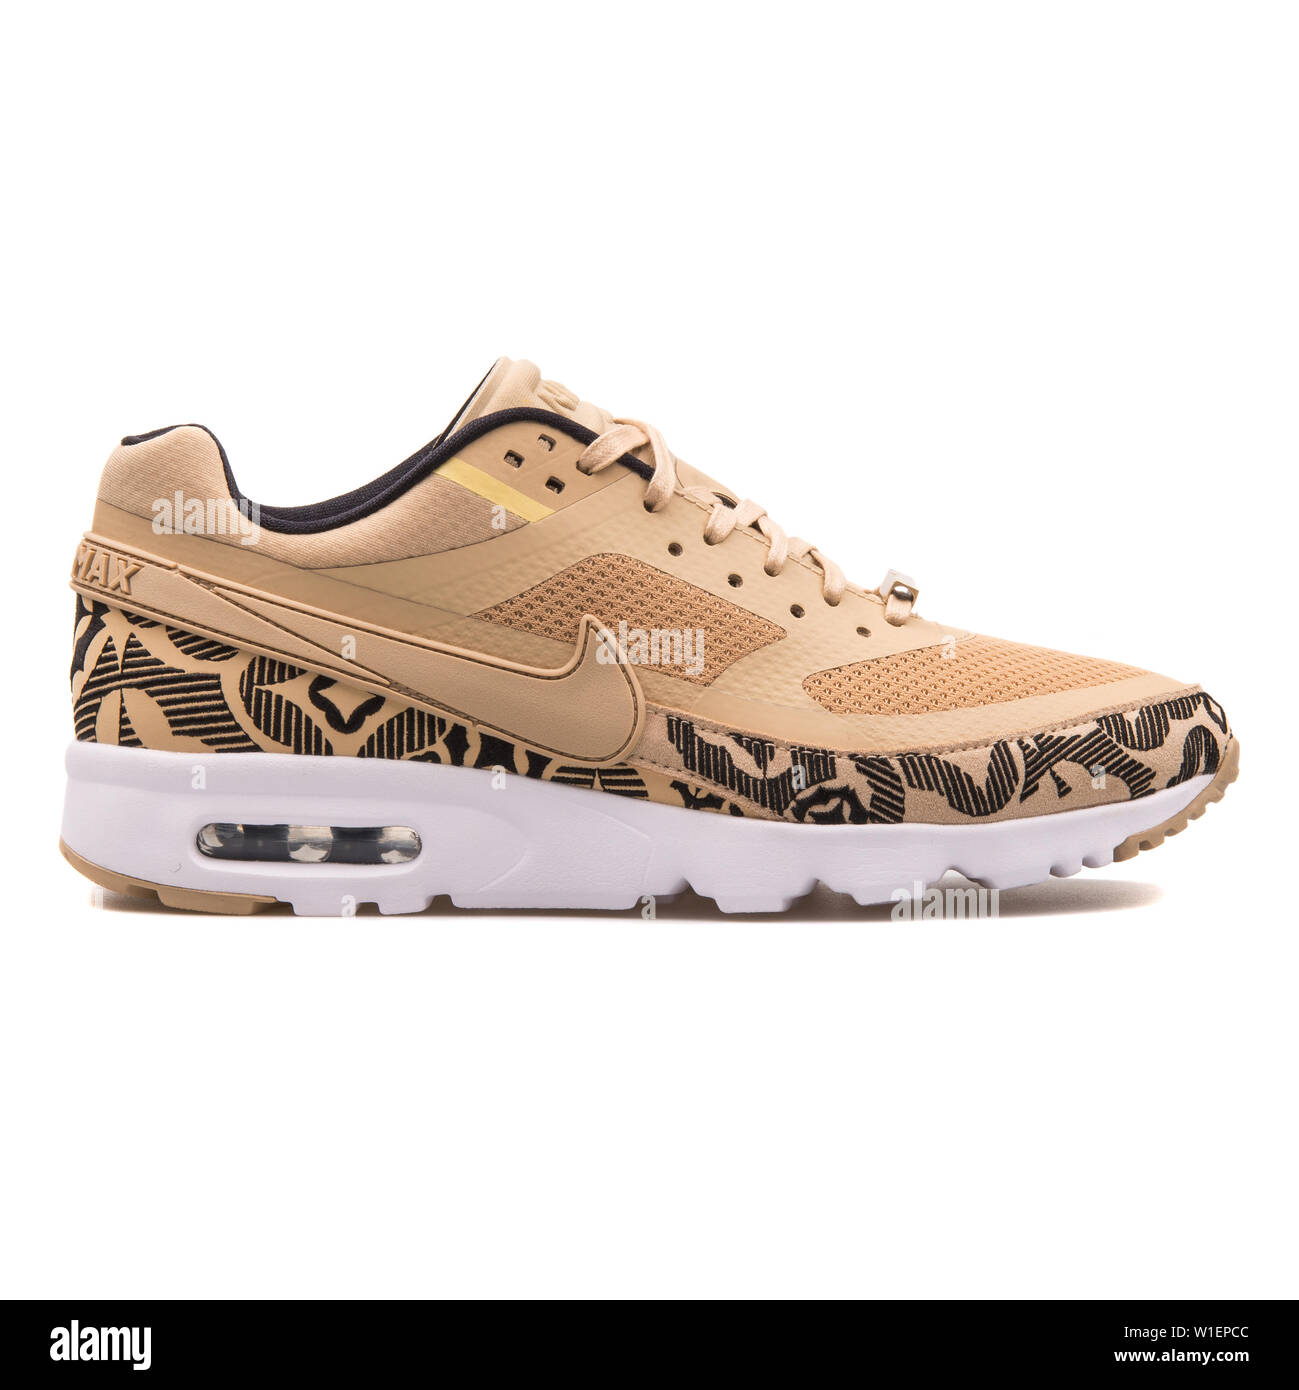 VIENNA, AUSTRIA - AUGUST 10, 2017: Nike Air Max BW Ultra LOTC QS beige and  black sneaker on white background Stock Photo - Alamy